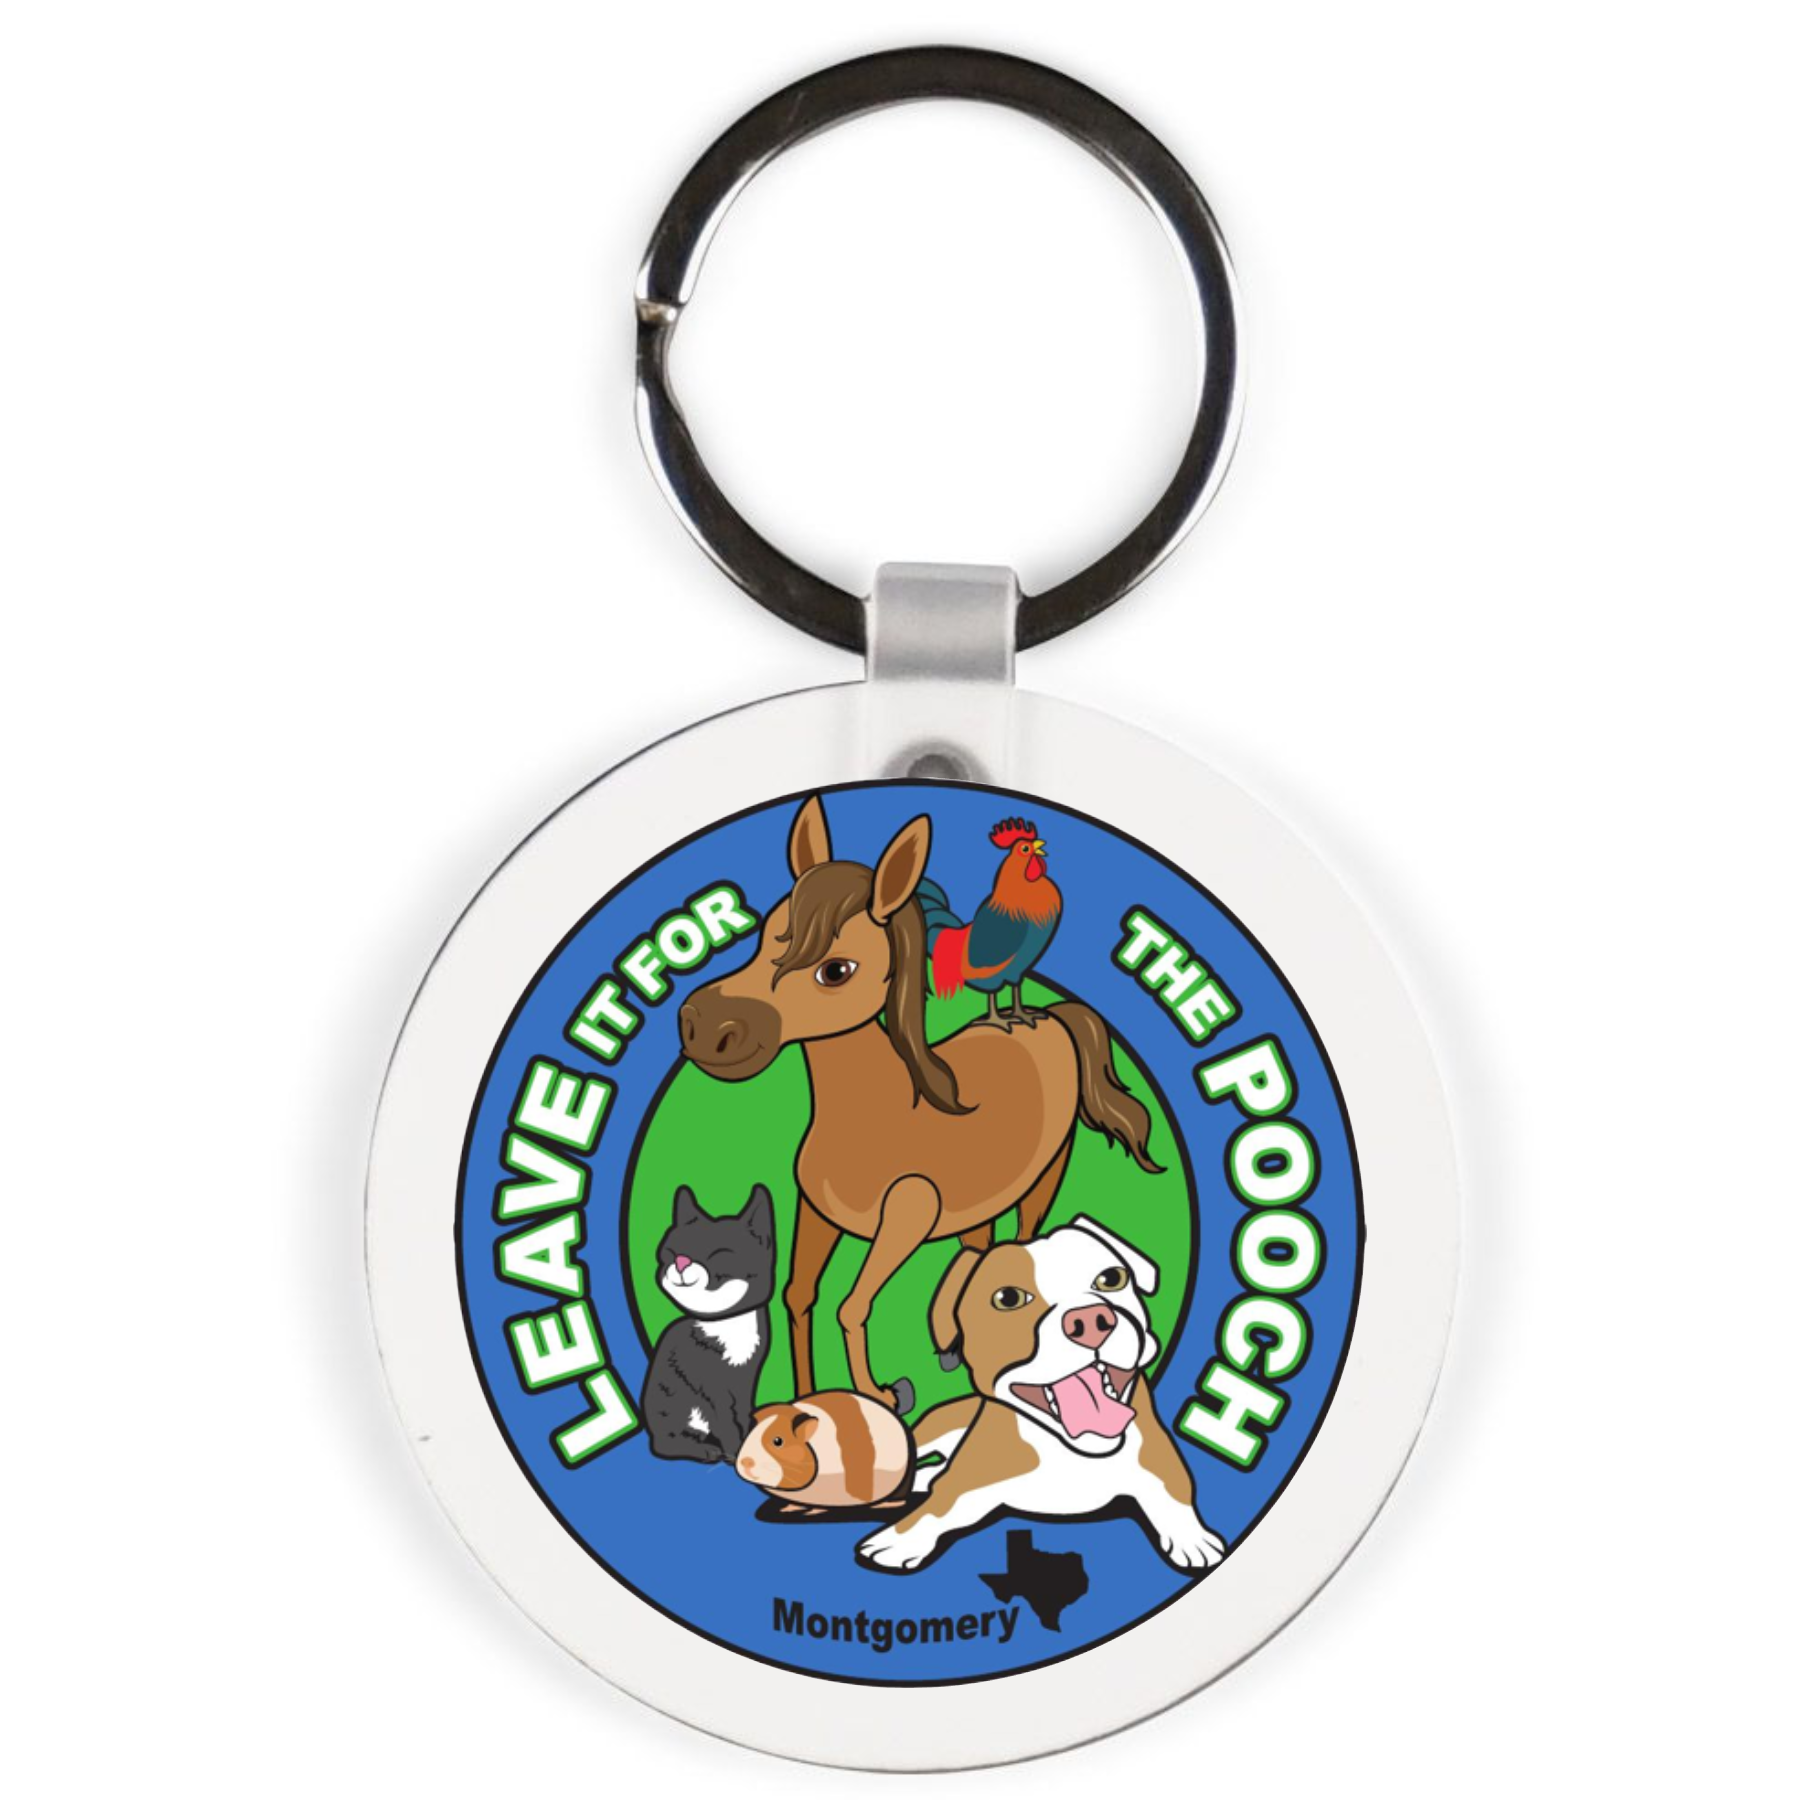 Leave It For The Pooch Keychains Double-Sided Pendants